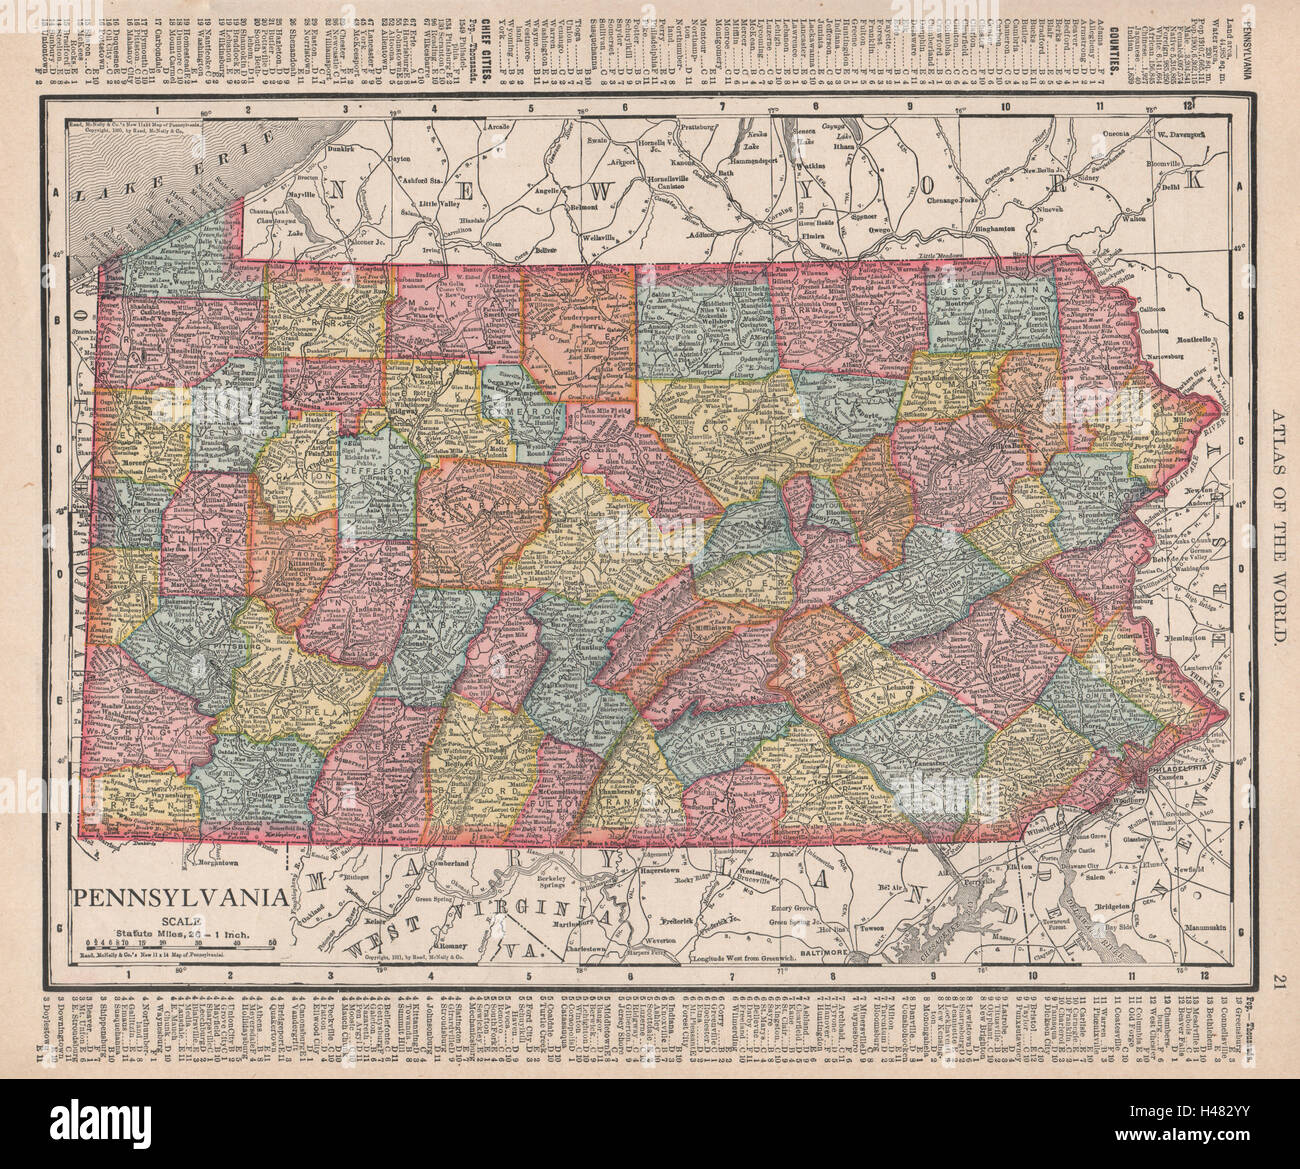 Pennsylvania state map showing counties. RAND MCNALLY 1912 old antique Stock Photo